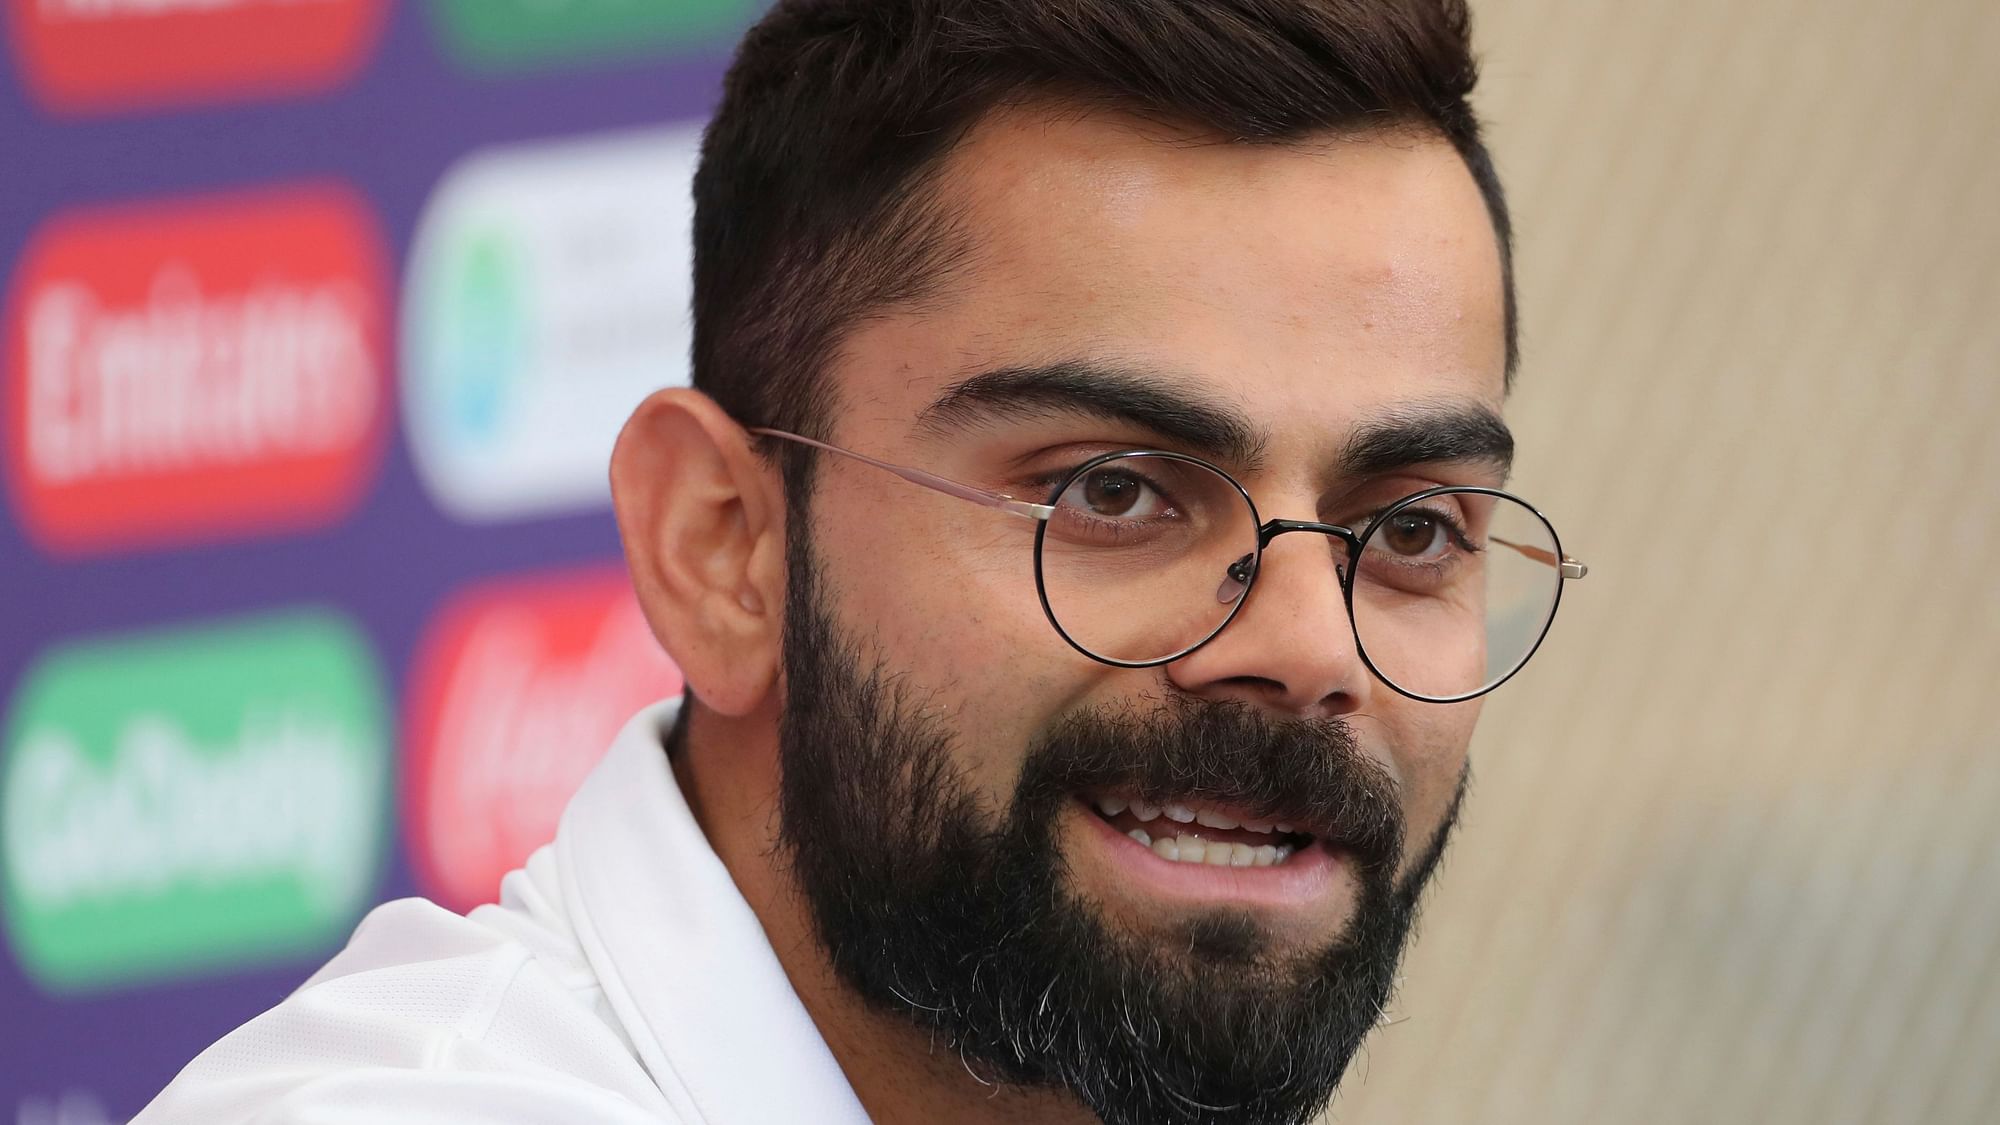 Virat Kohli will be leading the Indian team in his first World Cup match as captain on Wednesday, against South Africa.